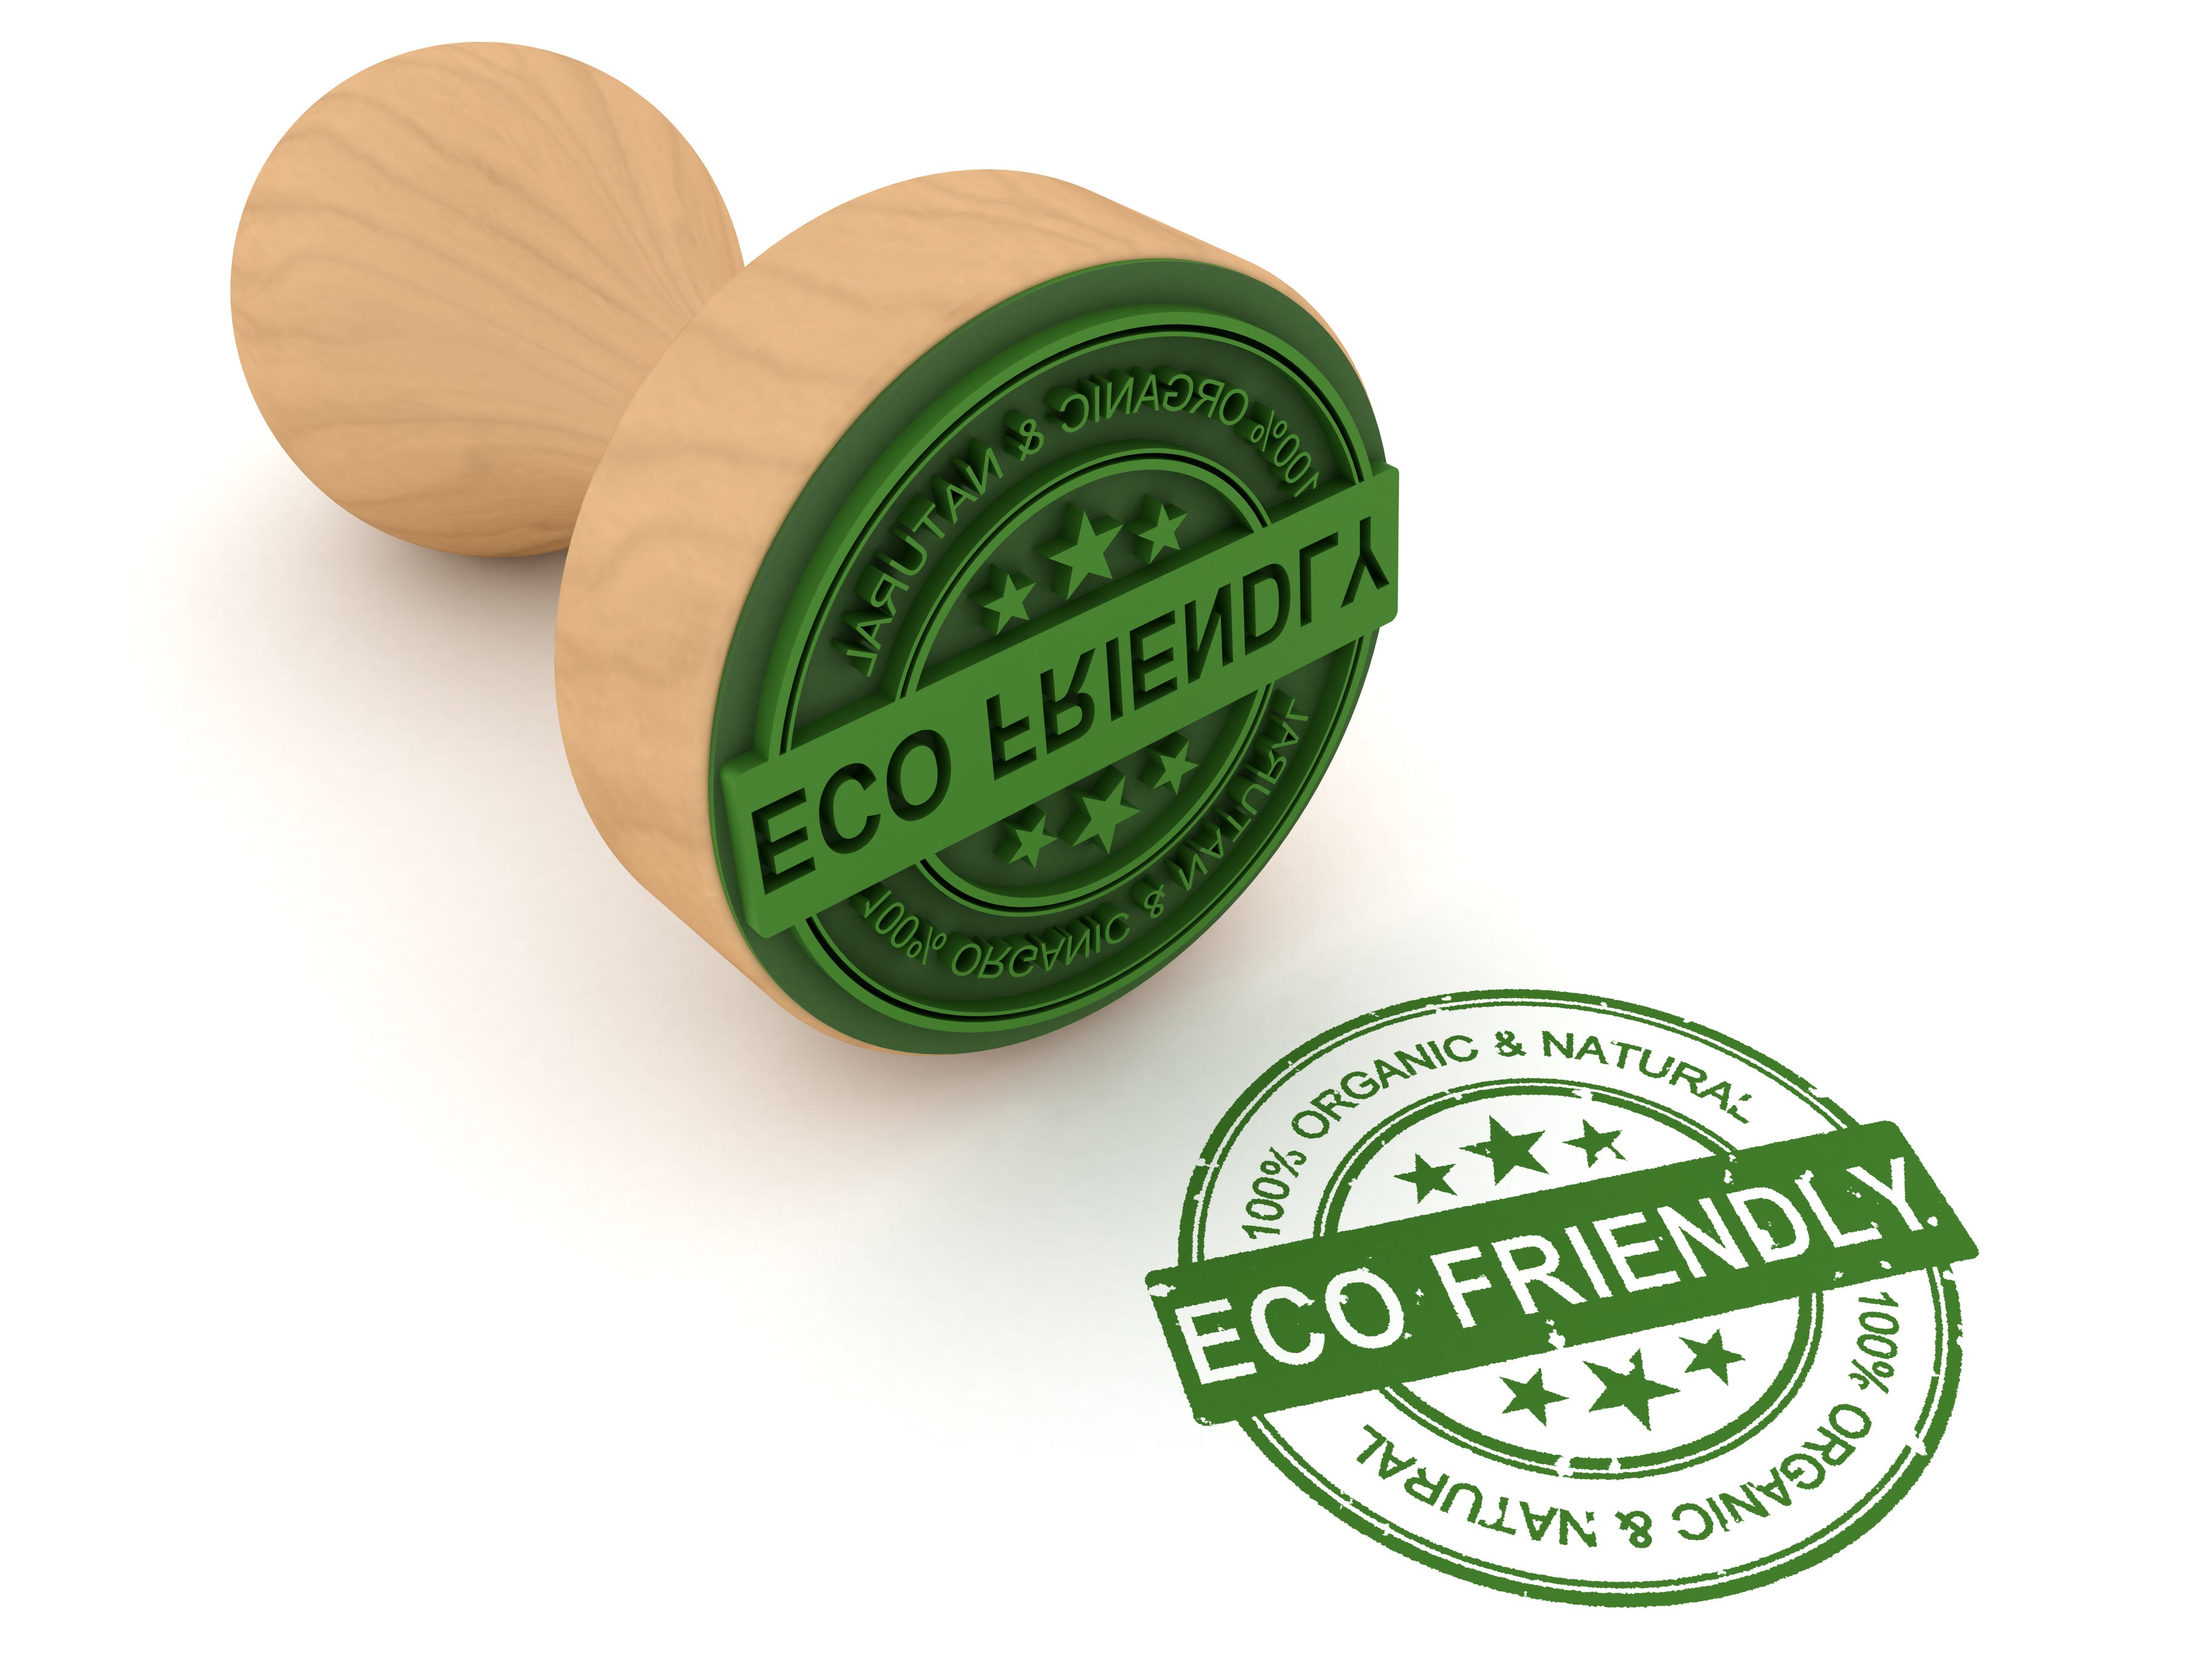 Compostable Certification Logos